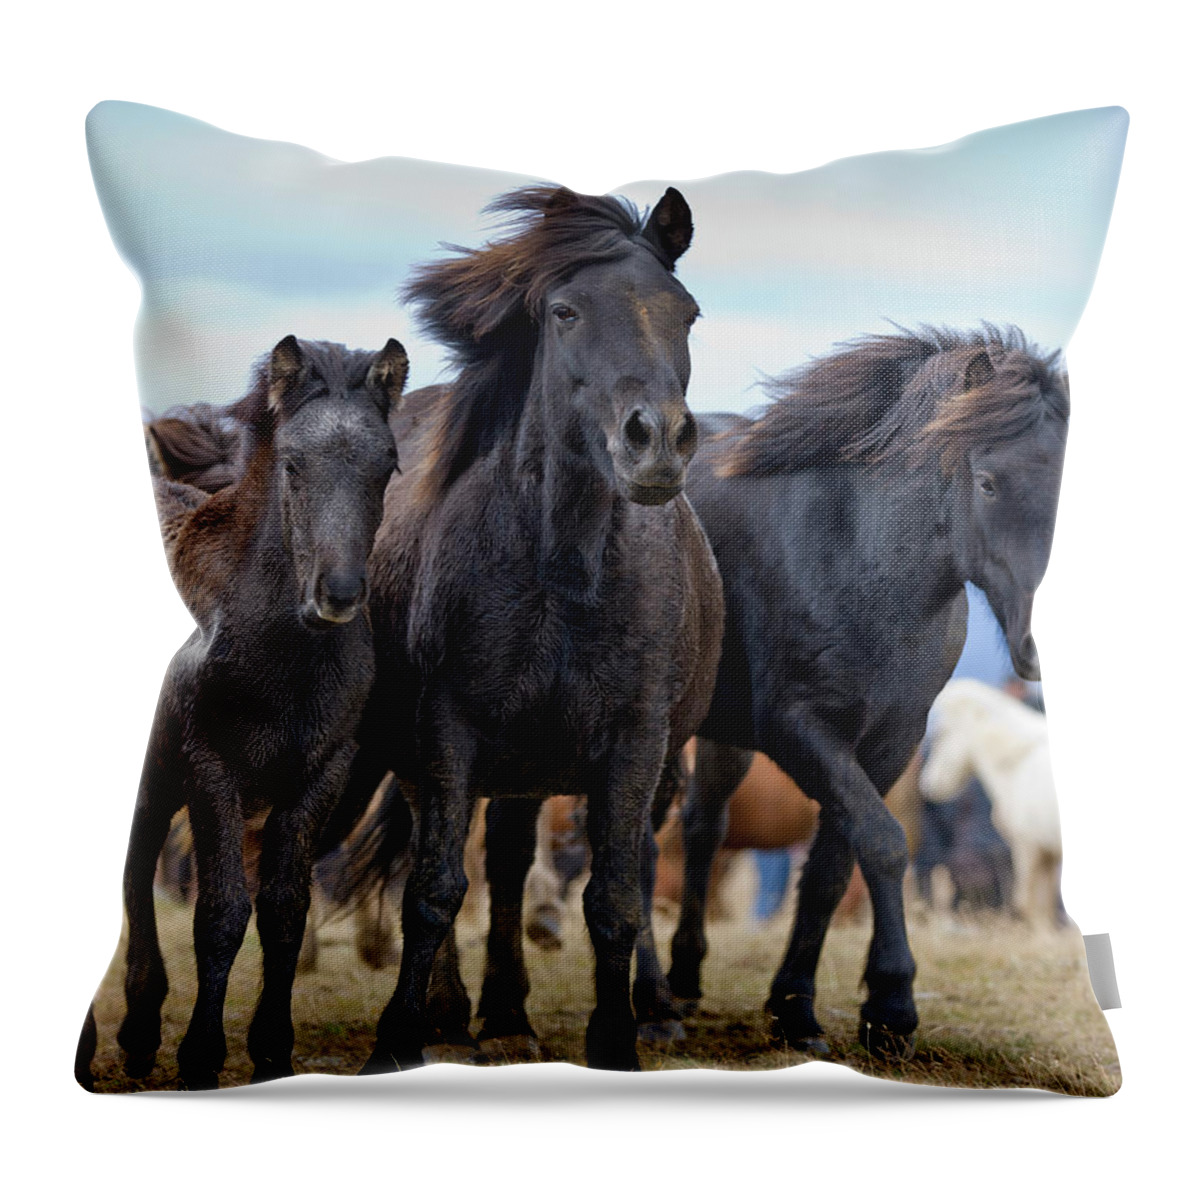 Horse Throw Pillow featuring the photograph Young Horses #1 by Arctic-images